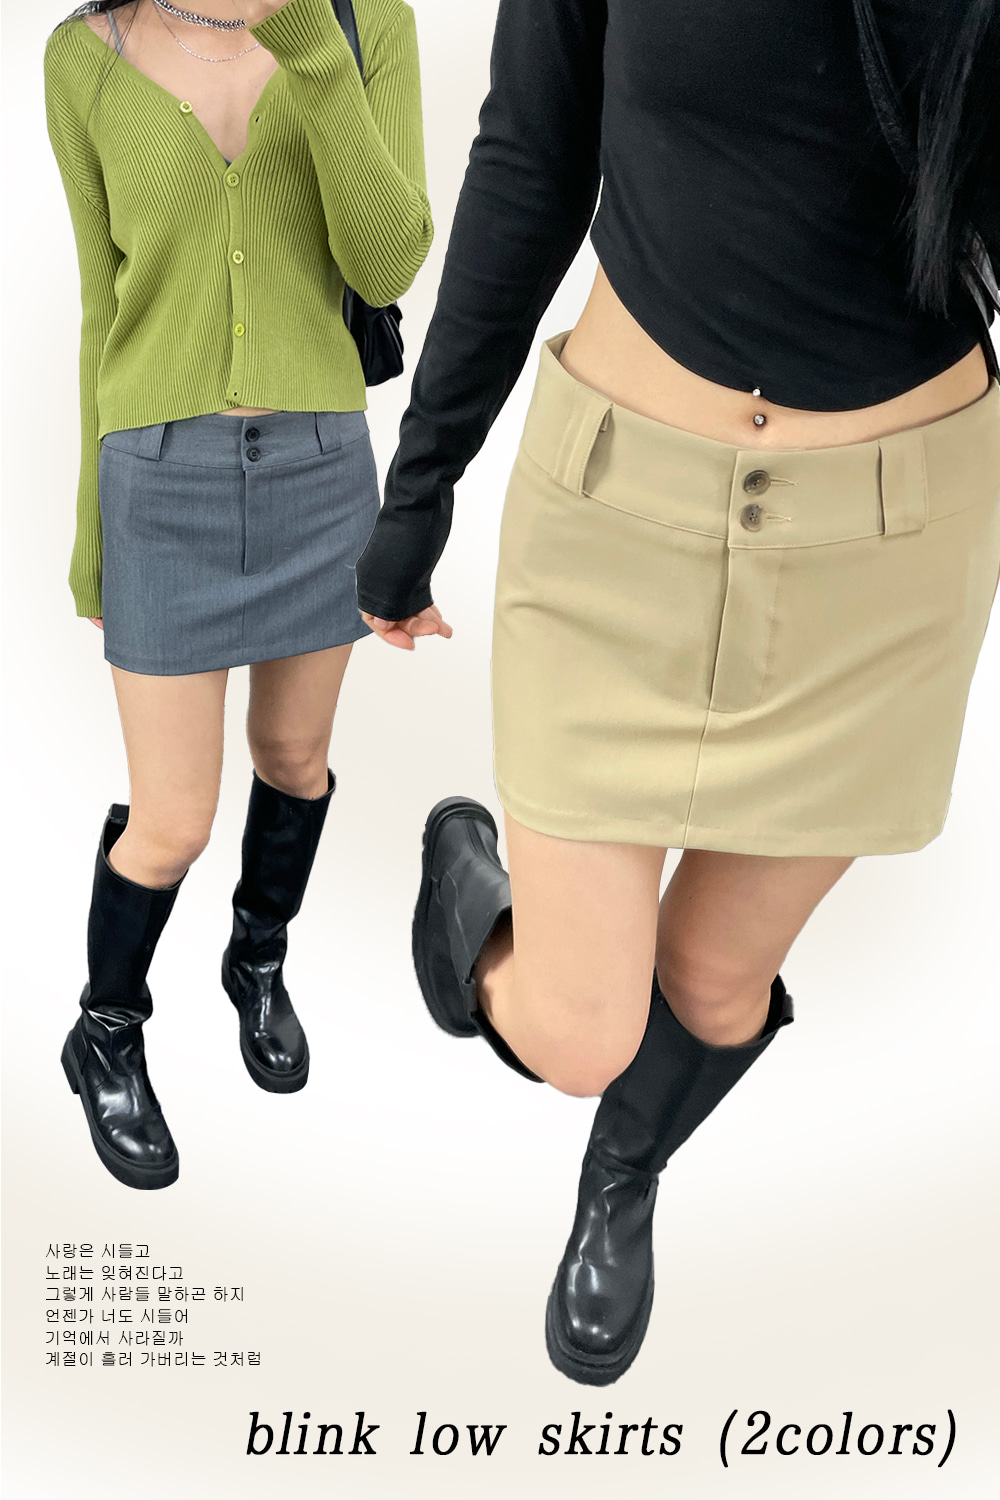 blink low skirts (2colors)